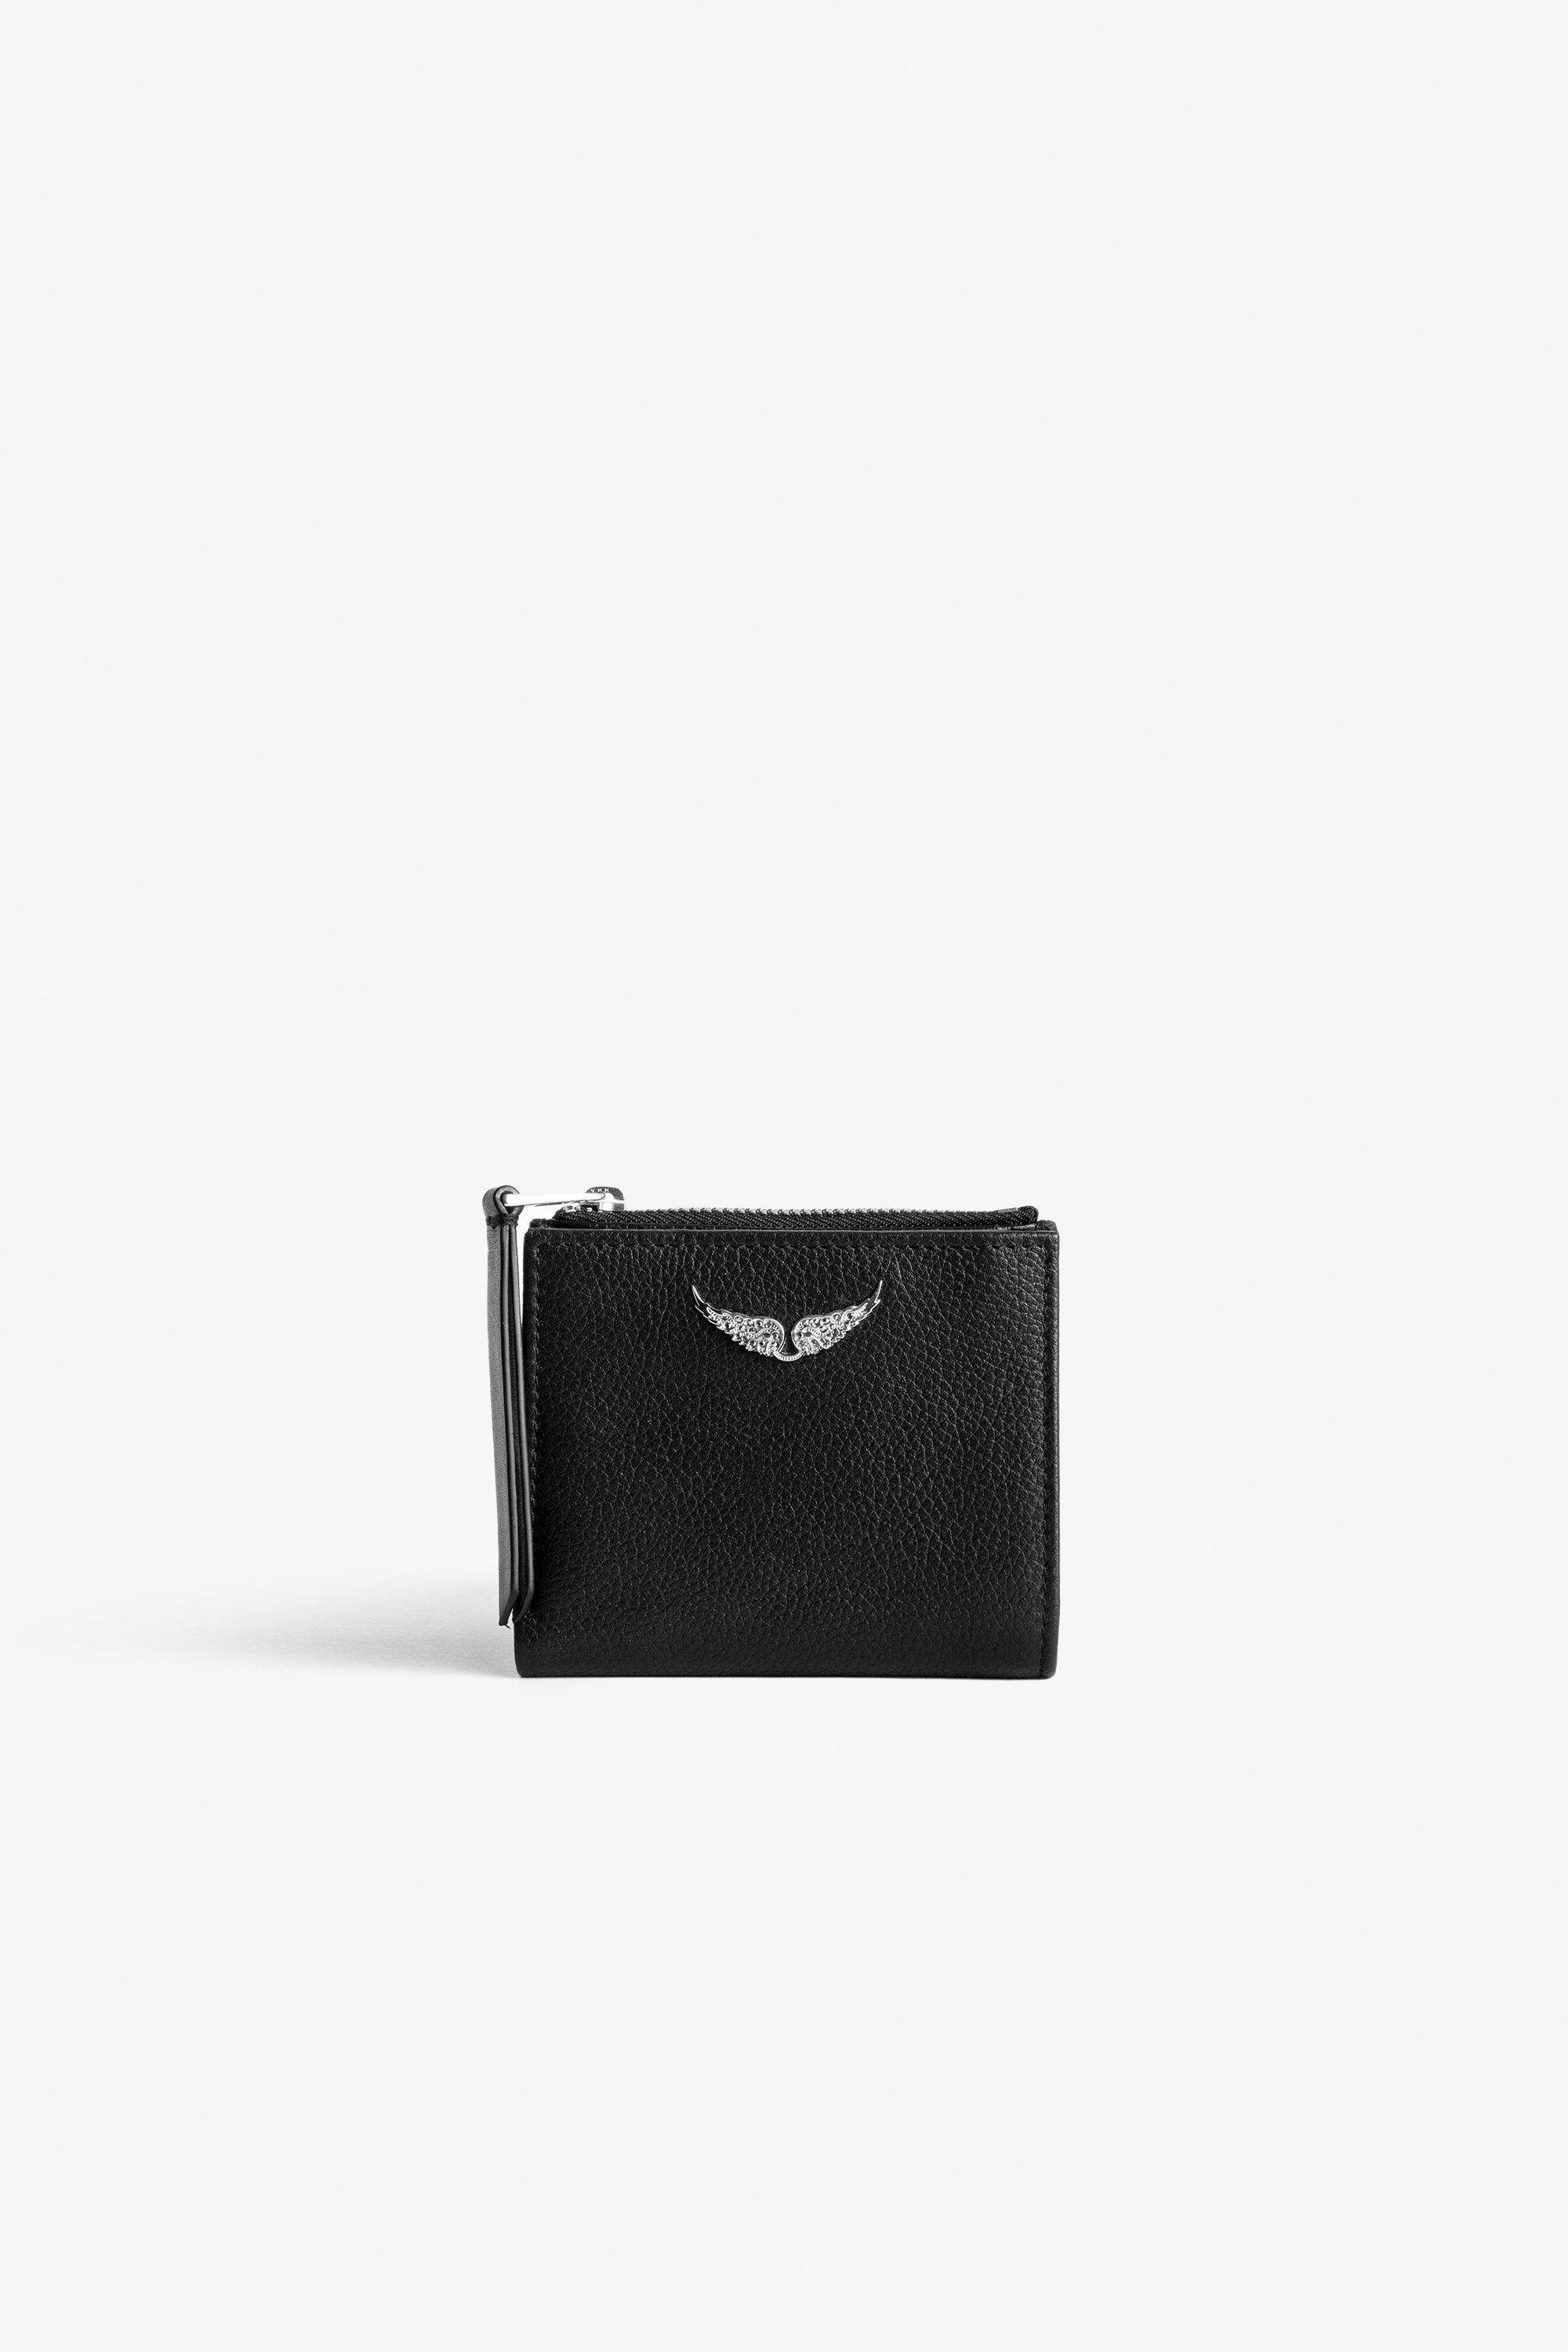 ZV Fold 財布 Black grained leather coin purse